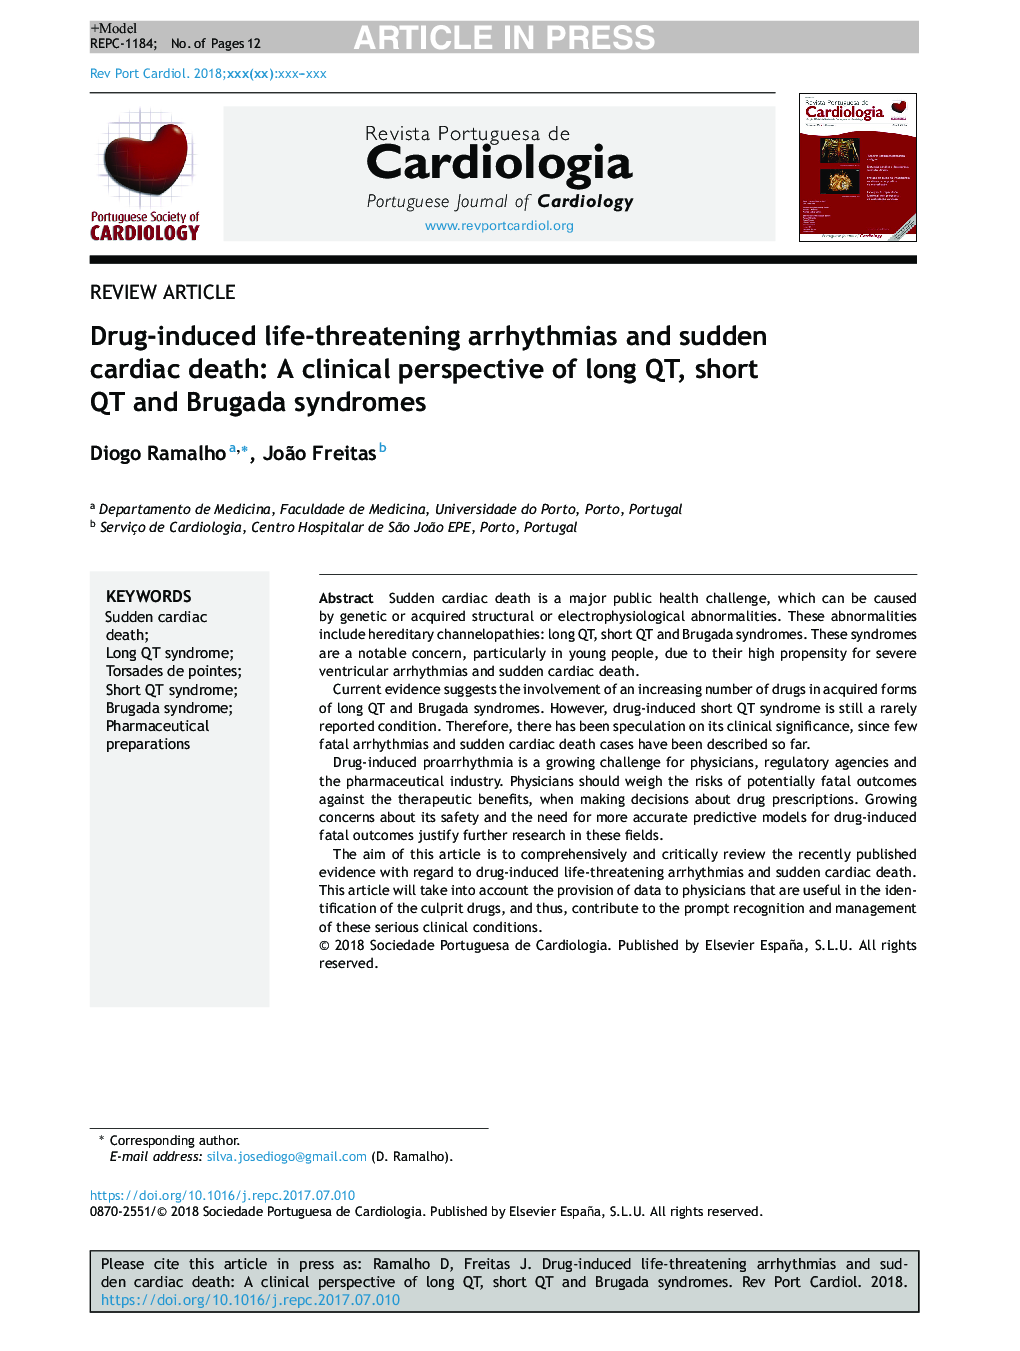 Drug-induced life-threatening arrhythmias and sudden cardiac death: A clinical perspective of long QT, short QT and Brugada syndromes